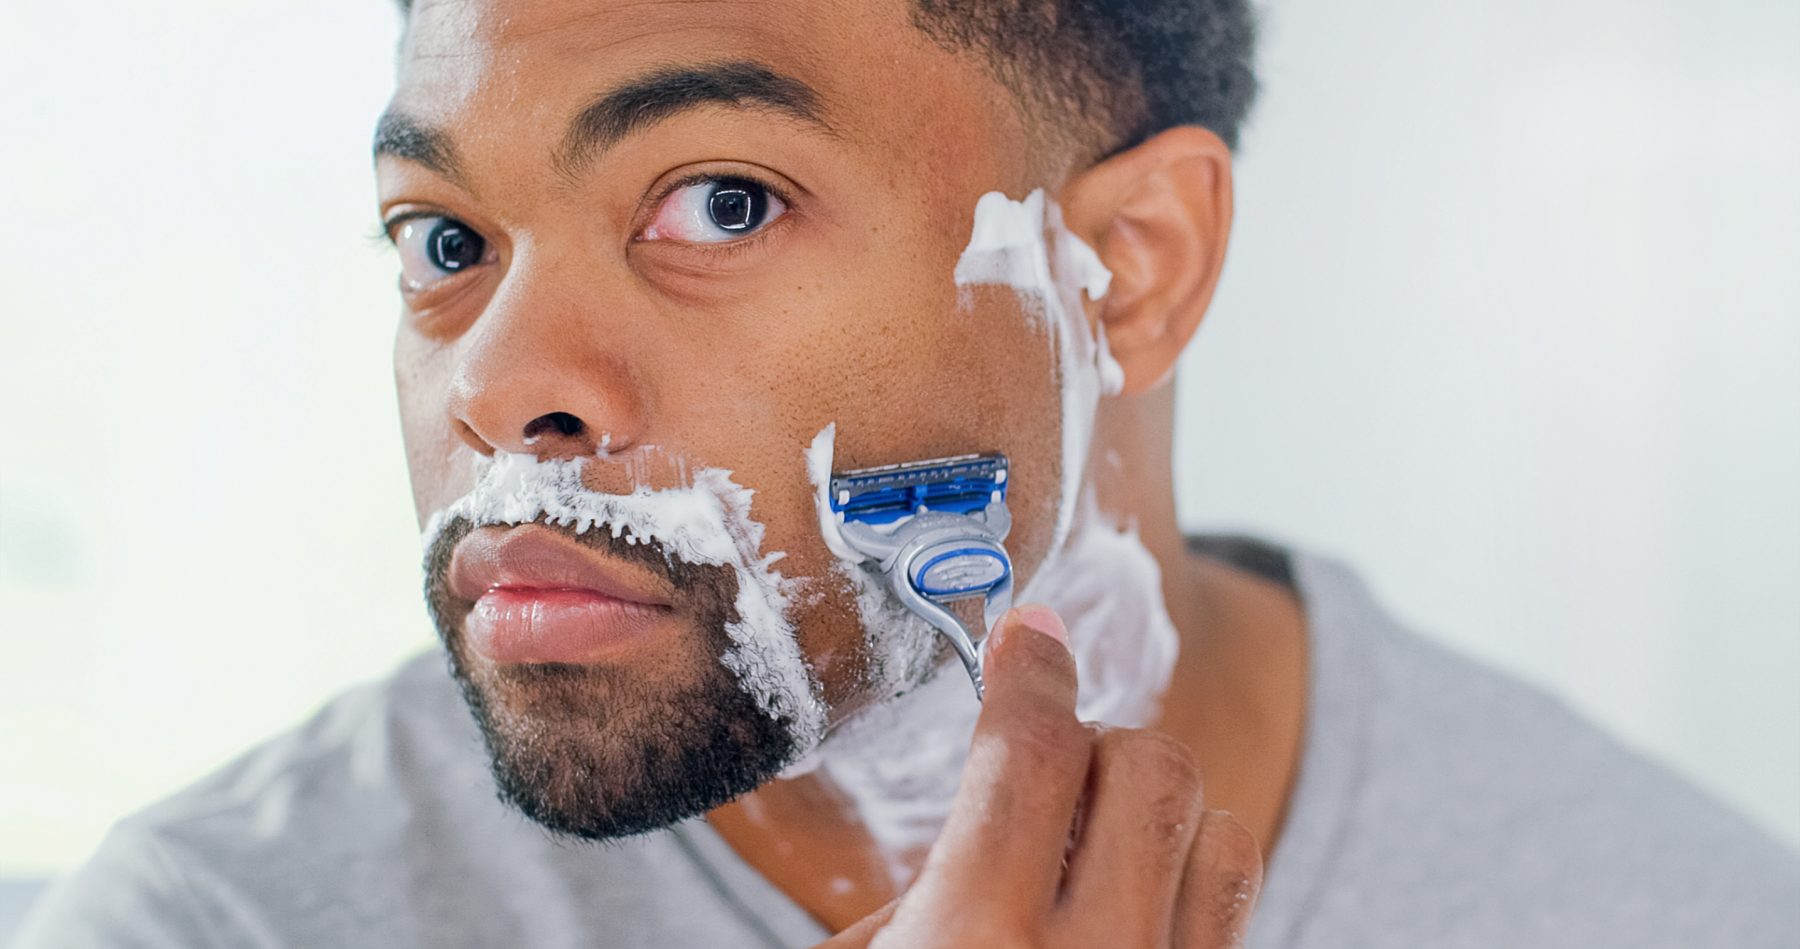 How to Clean & Care For Your Razor | Gillette UK